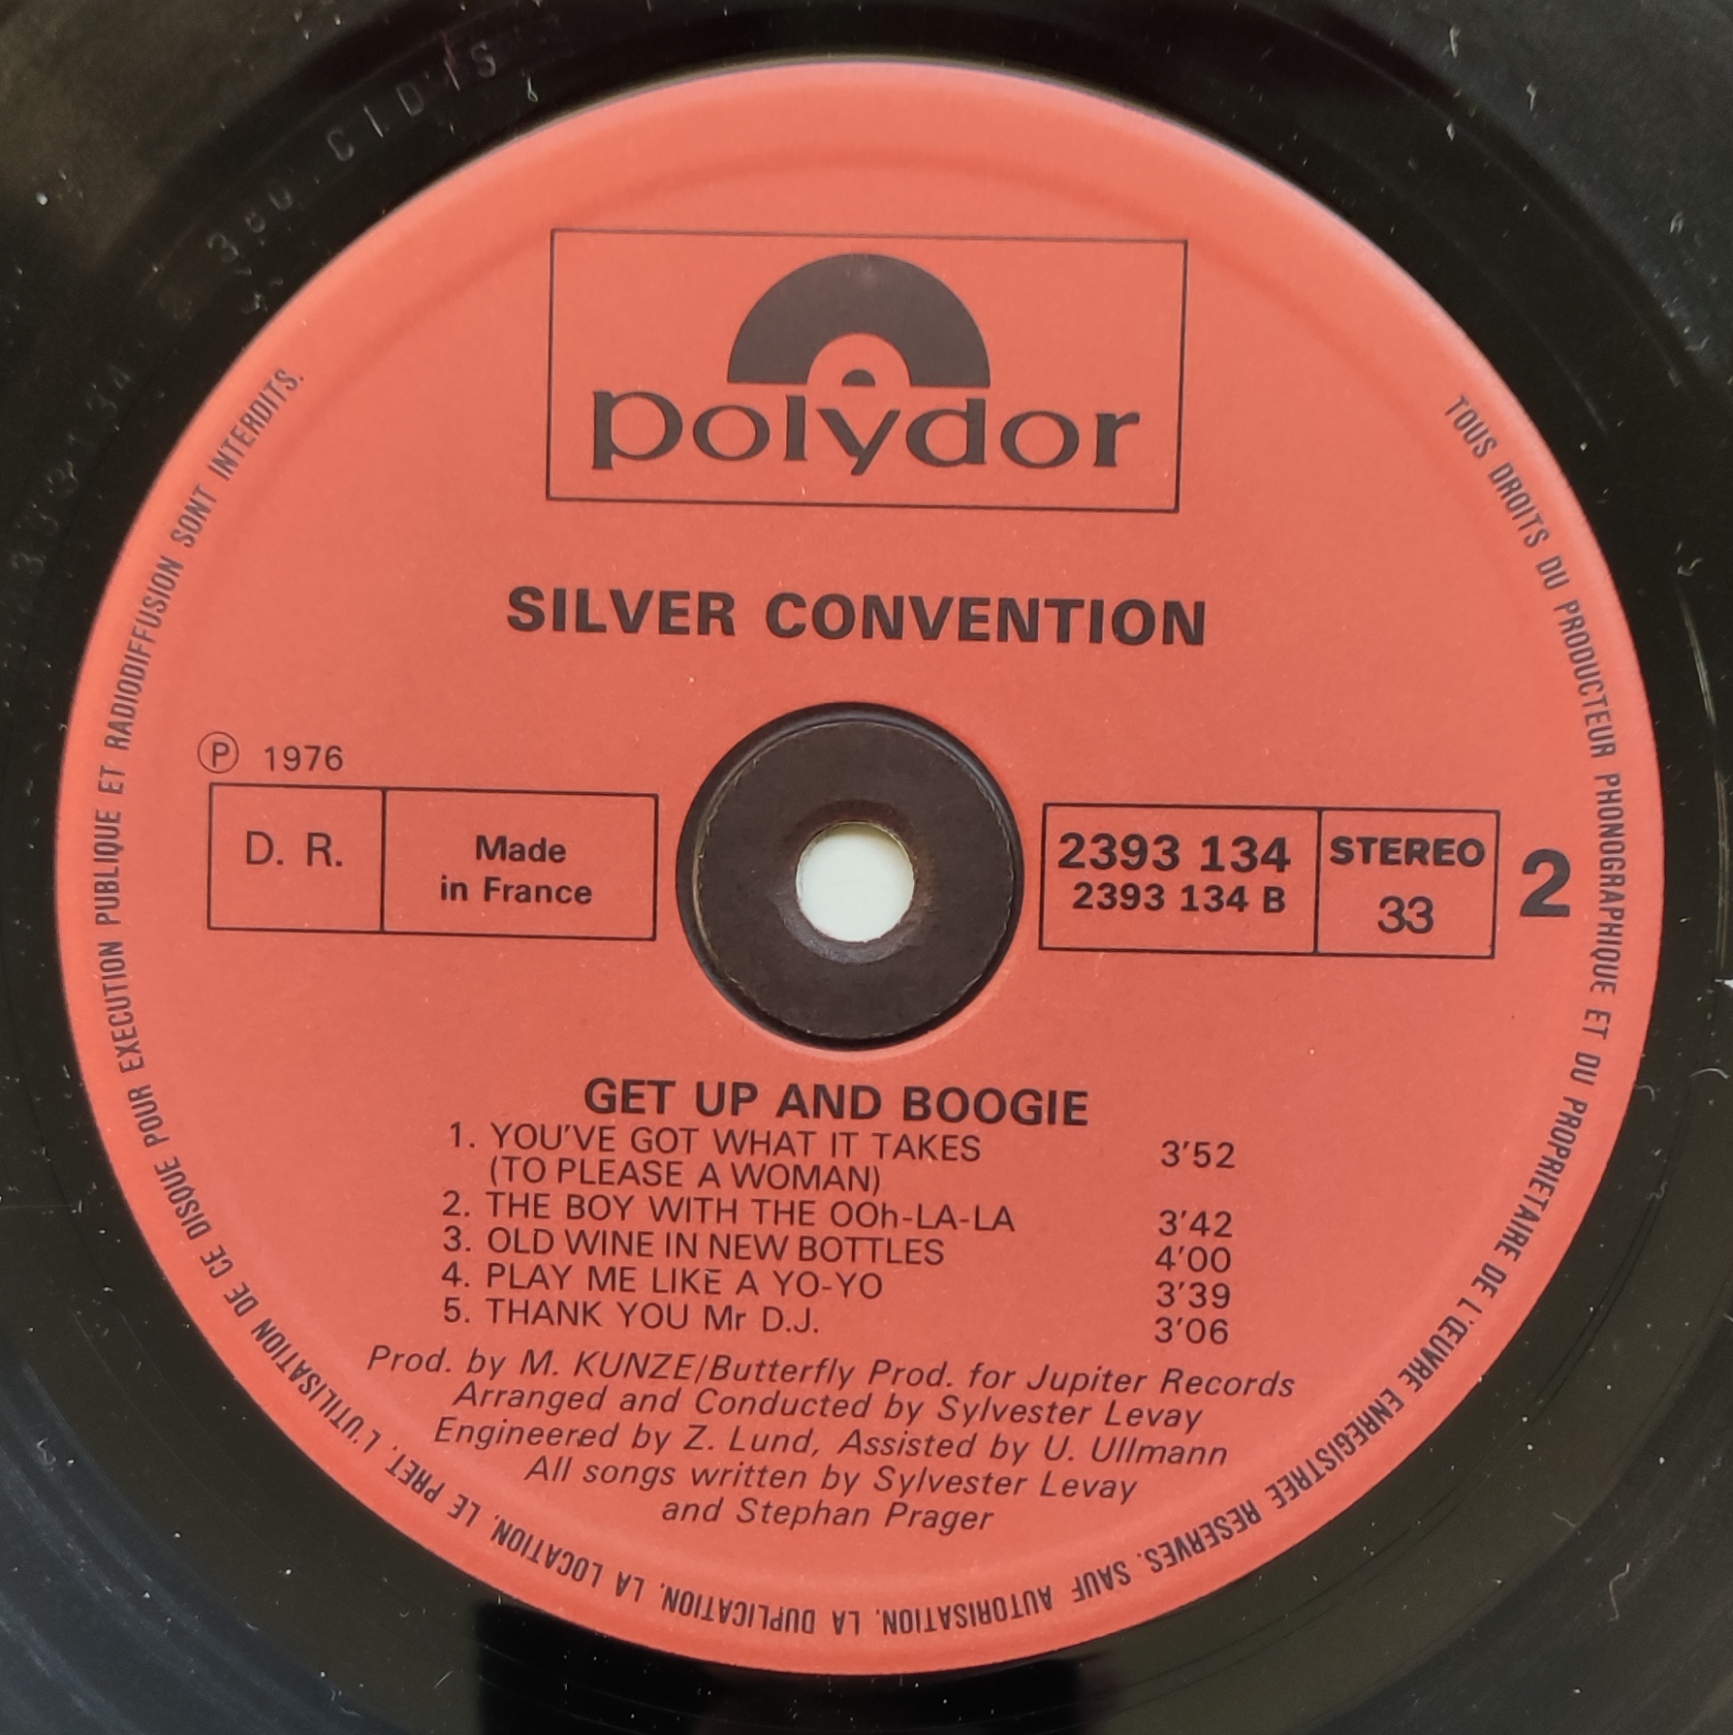 SILVER CONVENTION - Get up and boogie - 1976 - France - Polydor - Vinyle  -33 Tours - OriginVinylStore